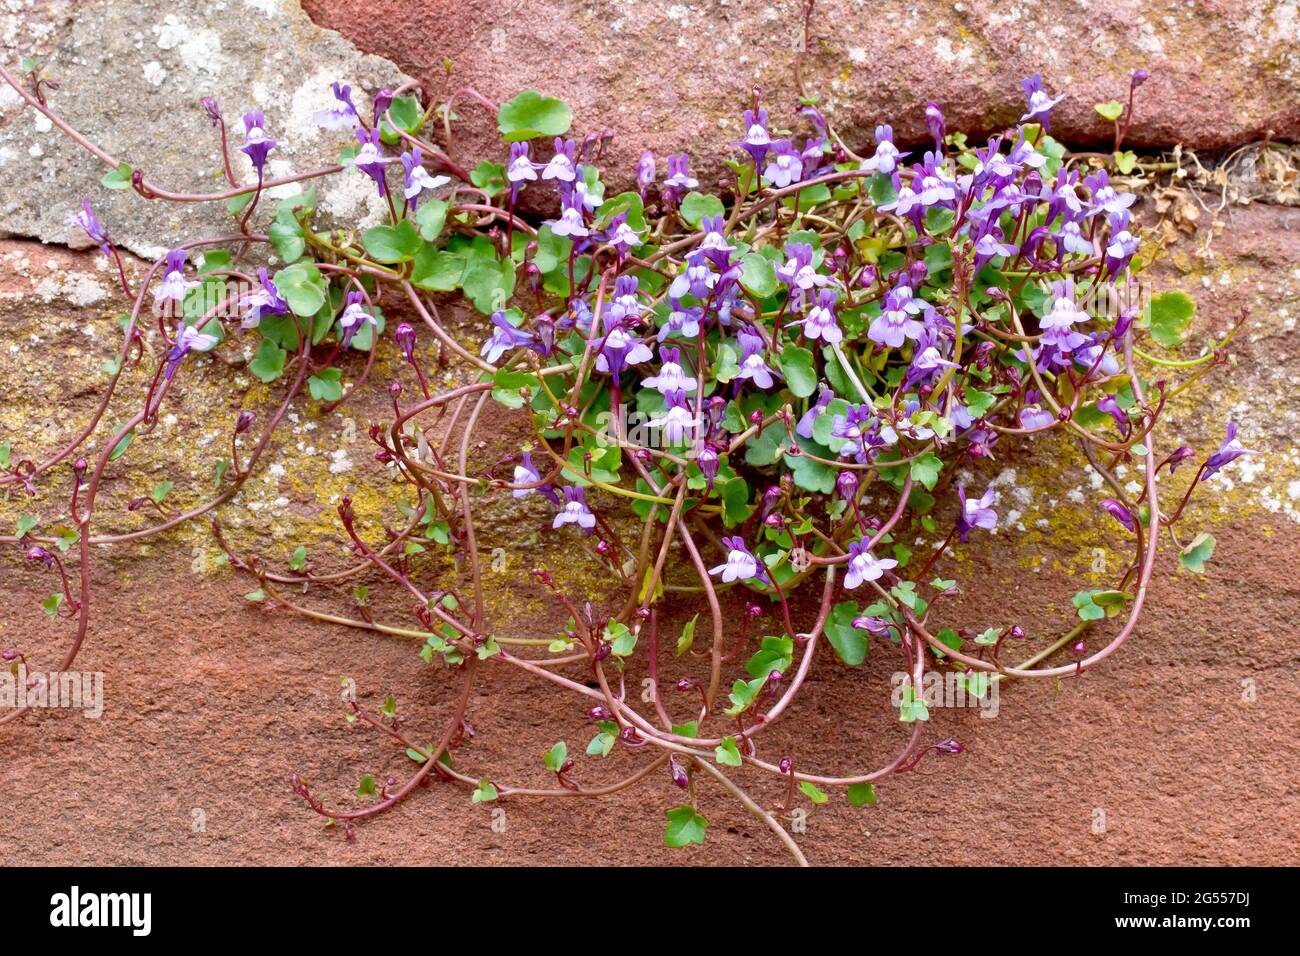 Ivy-leaved Toadflax (cymbalaria muralis), close up showng the plant growing from a crack in the mortar of a sandstone wall. Stock Photo